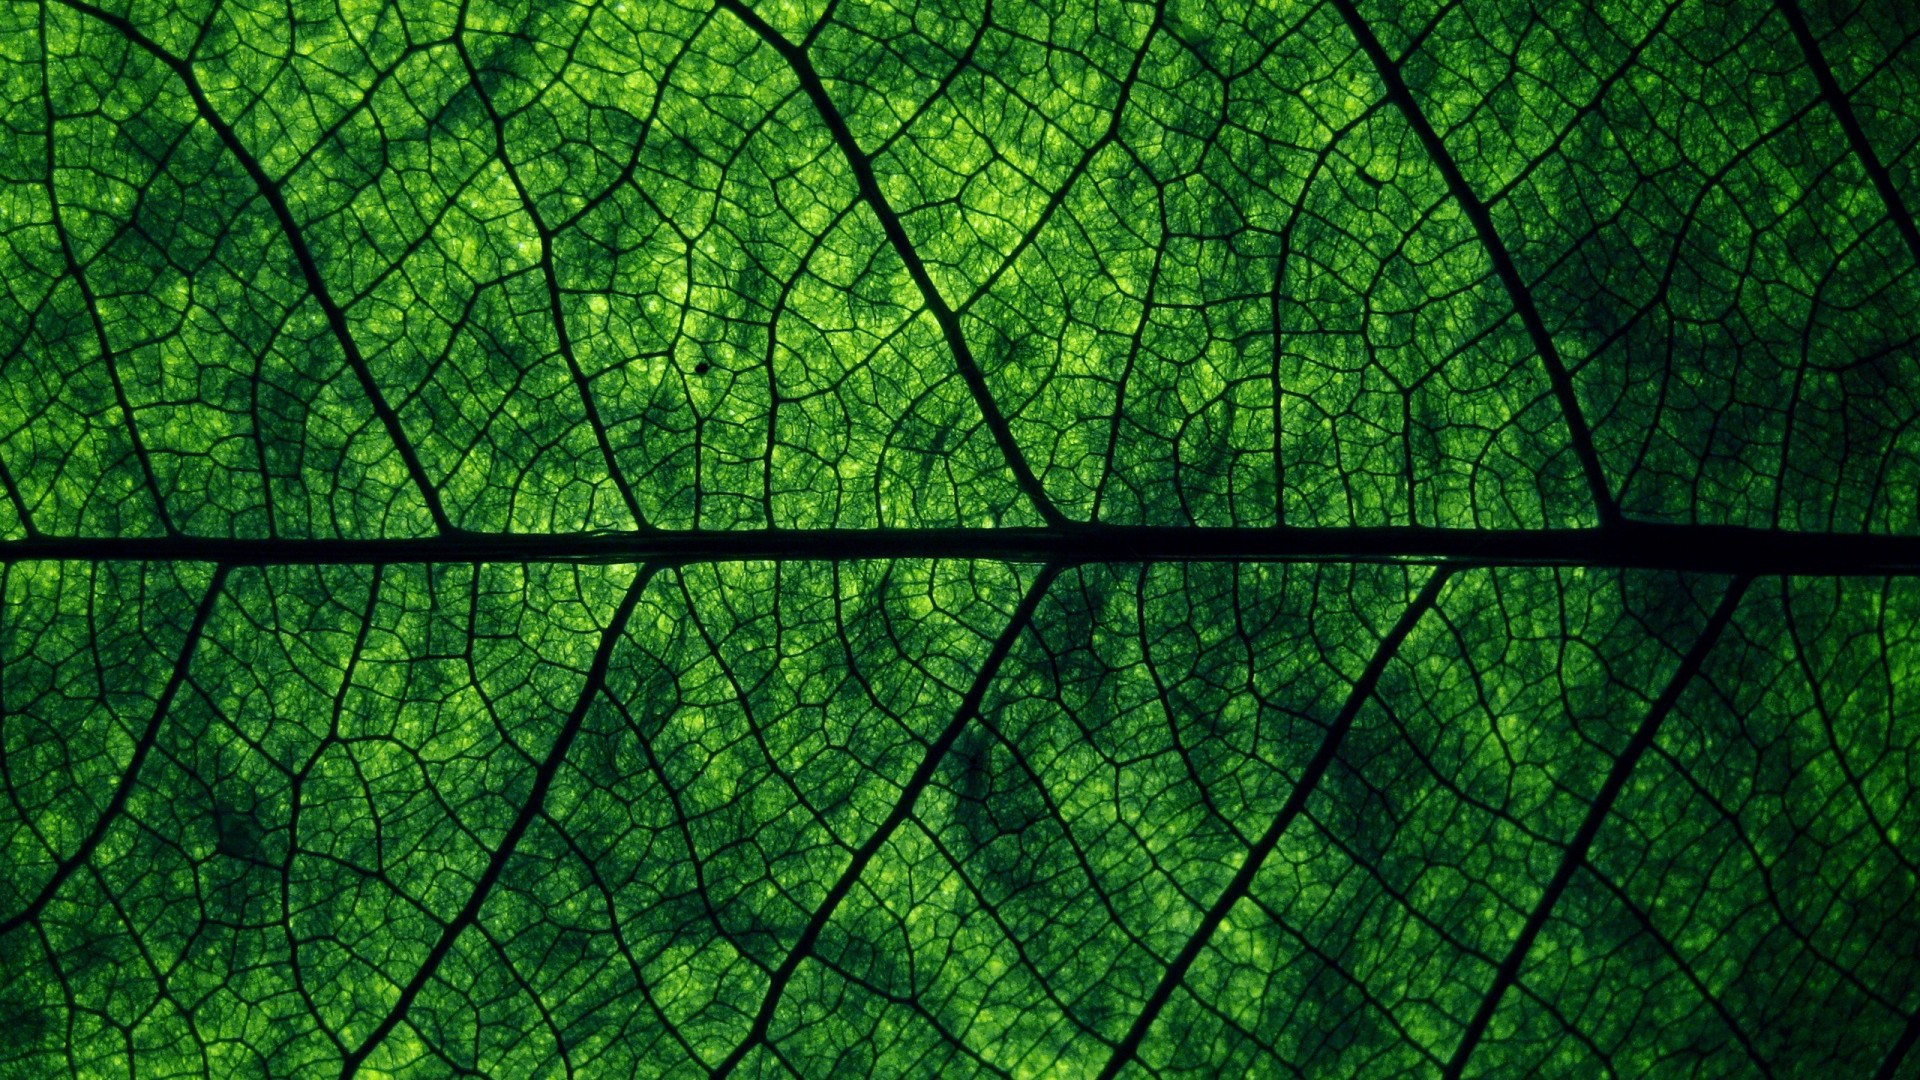 Background of green leaf of a tree wallpapers and images - wallpapers